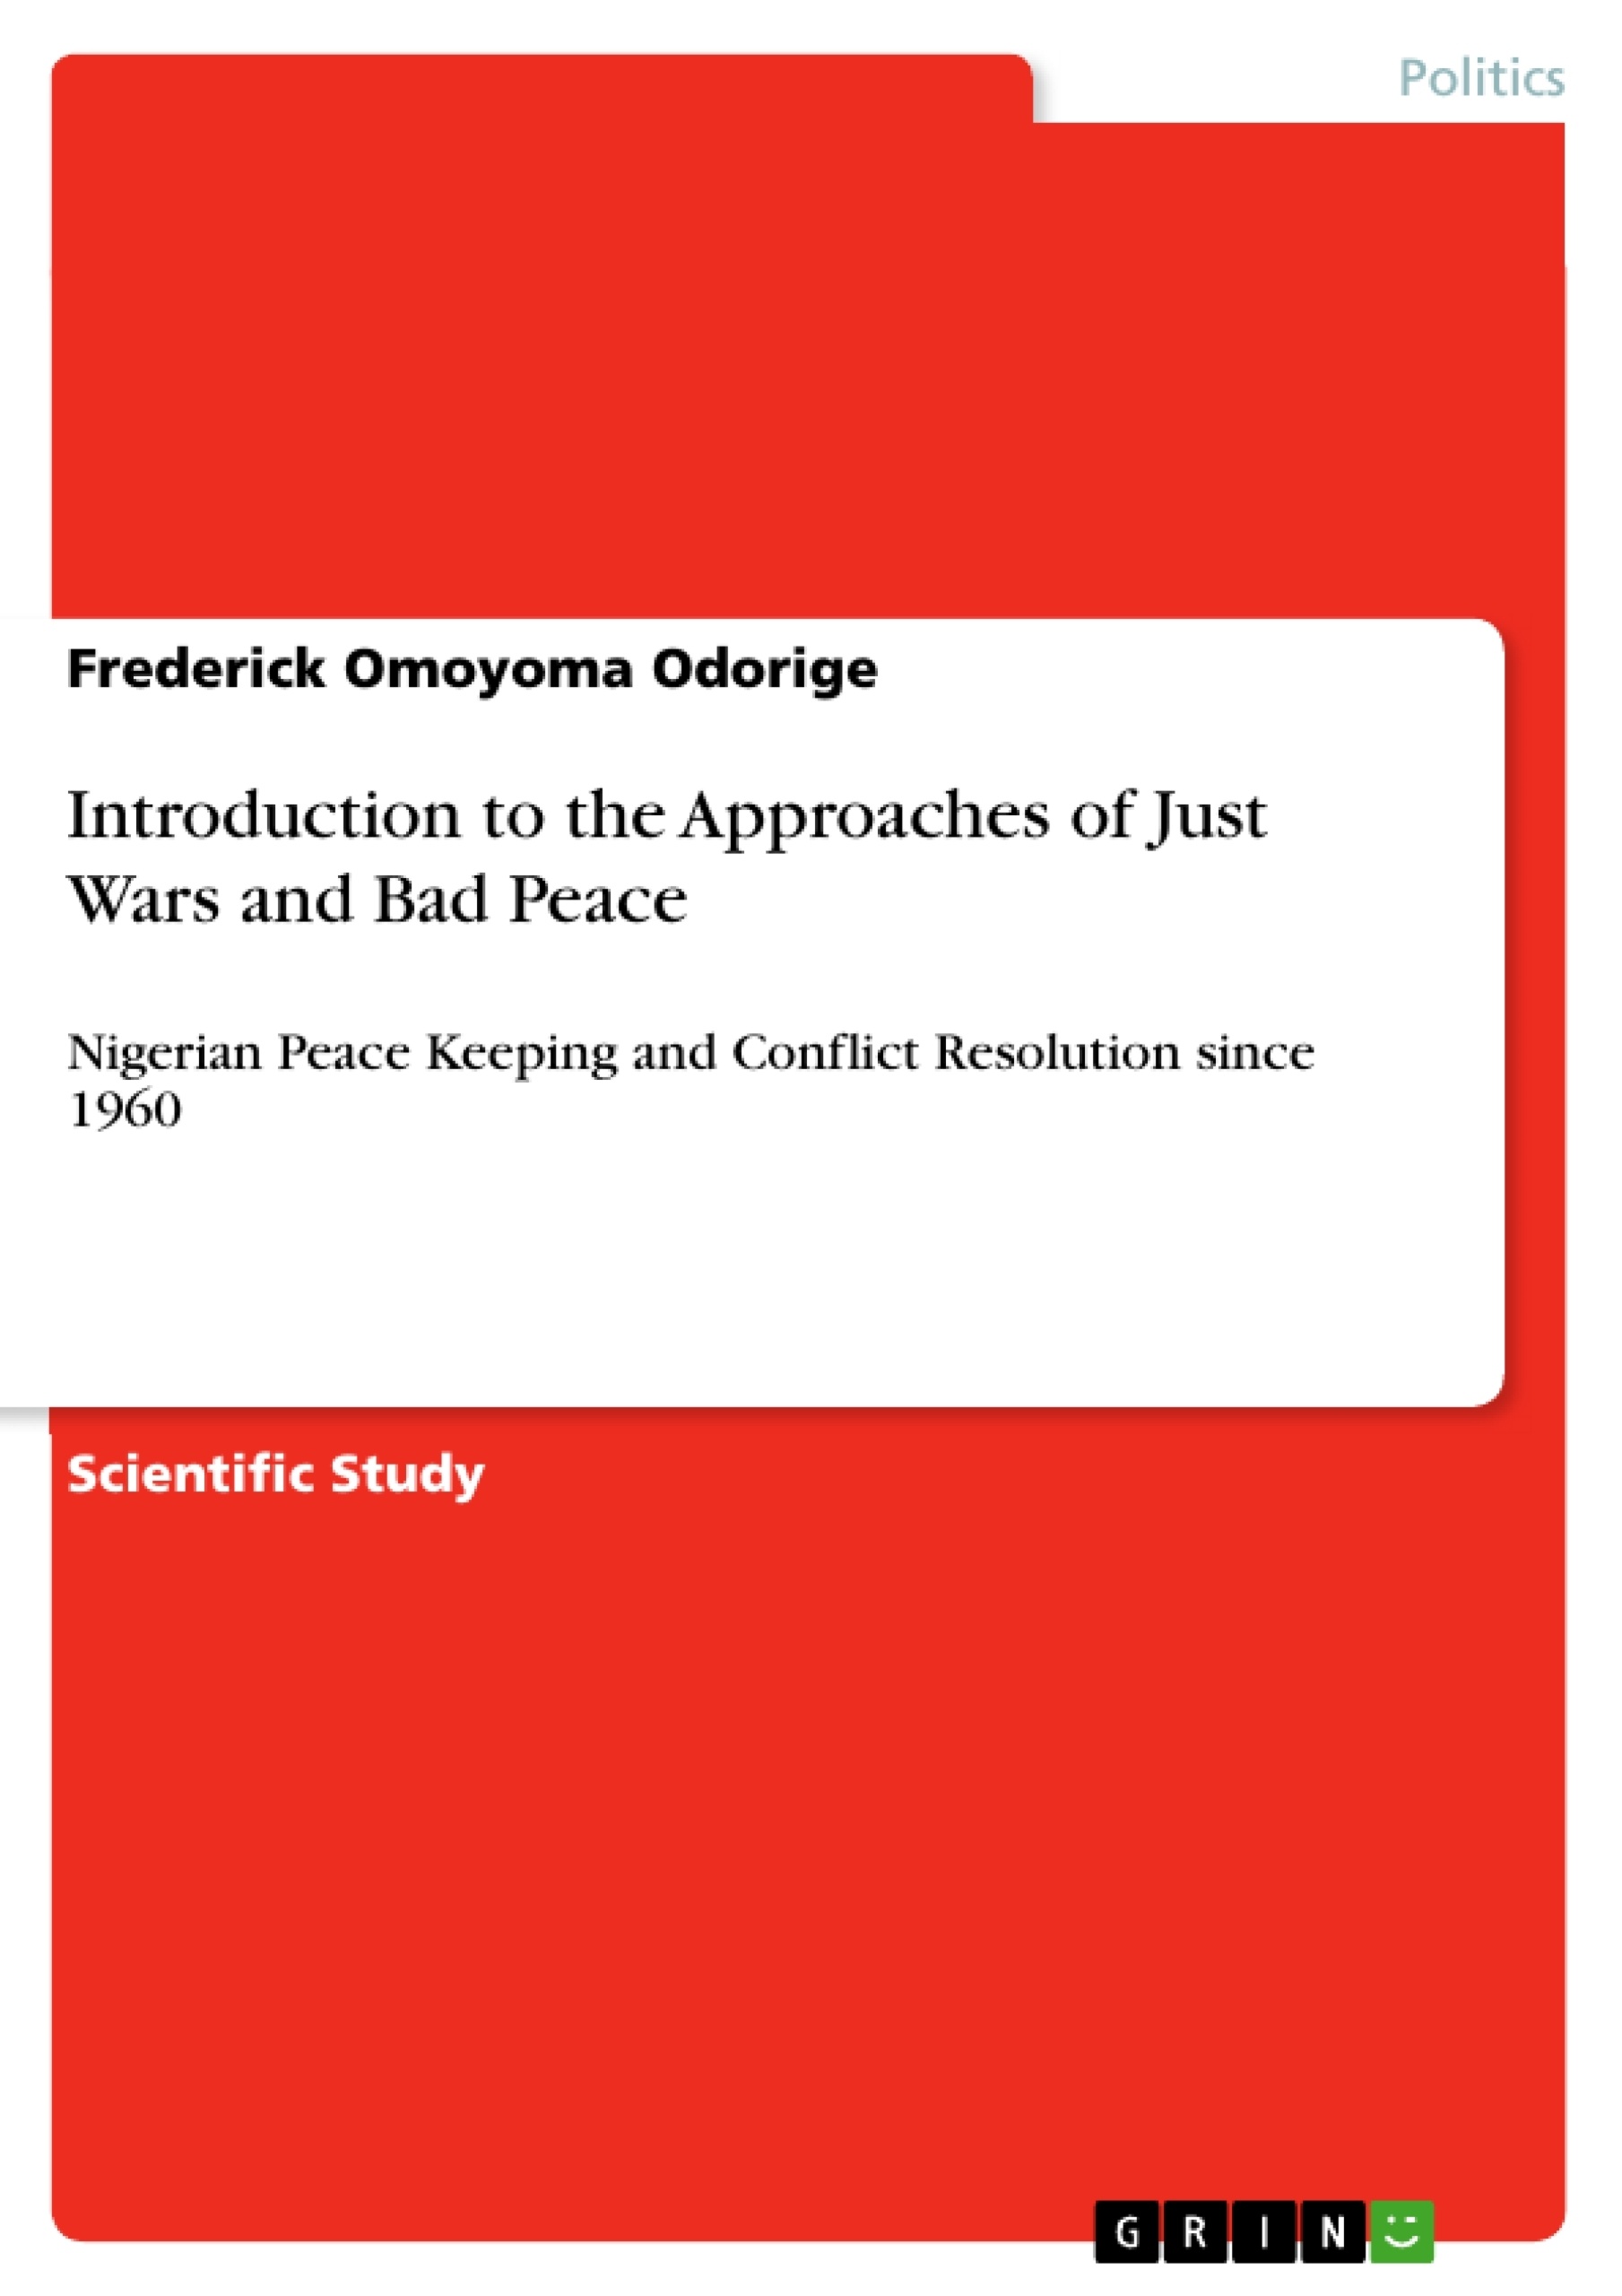 Title: Introduction to the Approaches of Just Wars and Bad Peace